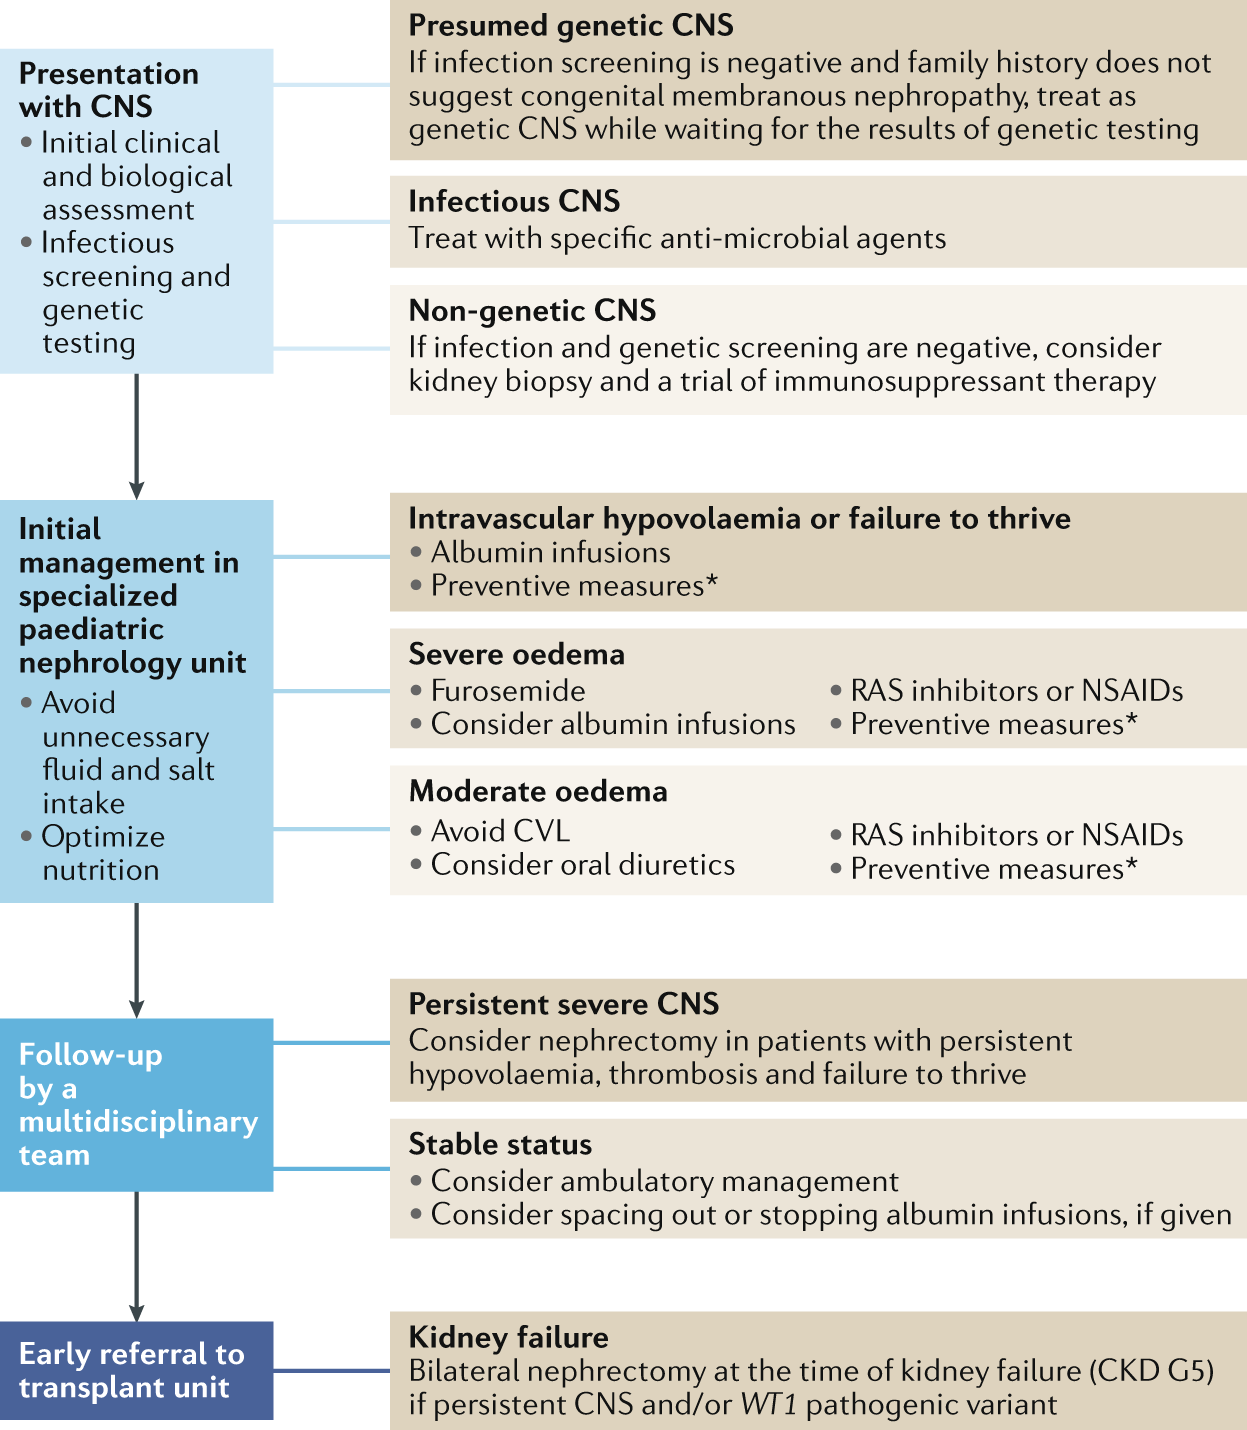 Management of congenital nephrotic syndrome: consensus recommendations of  the ERKNet-ESPN Working Group | Nature Reviews Nephrology